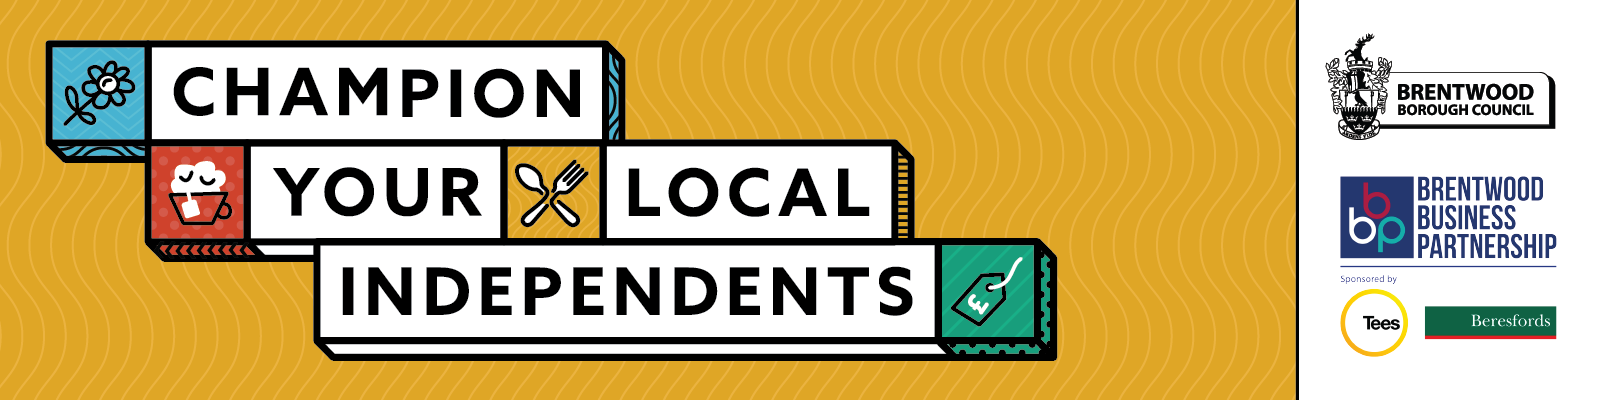 Champion your local independents